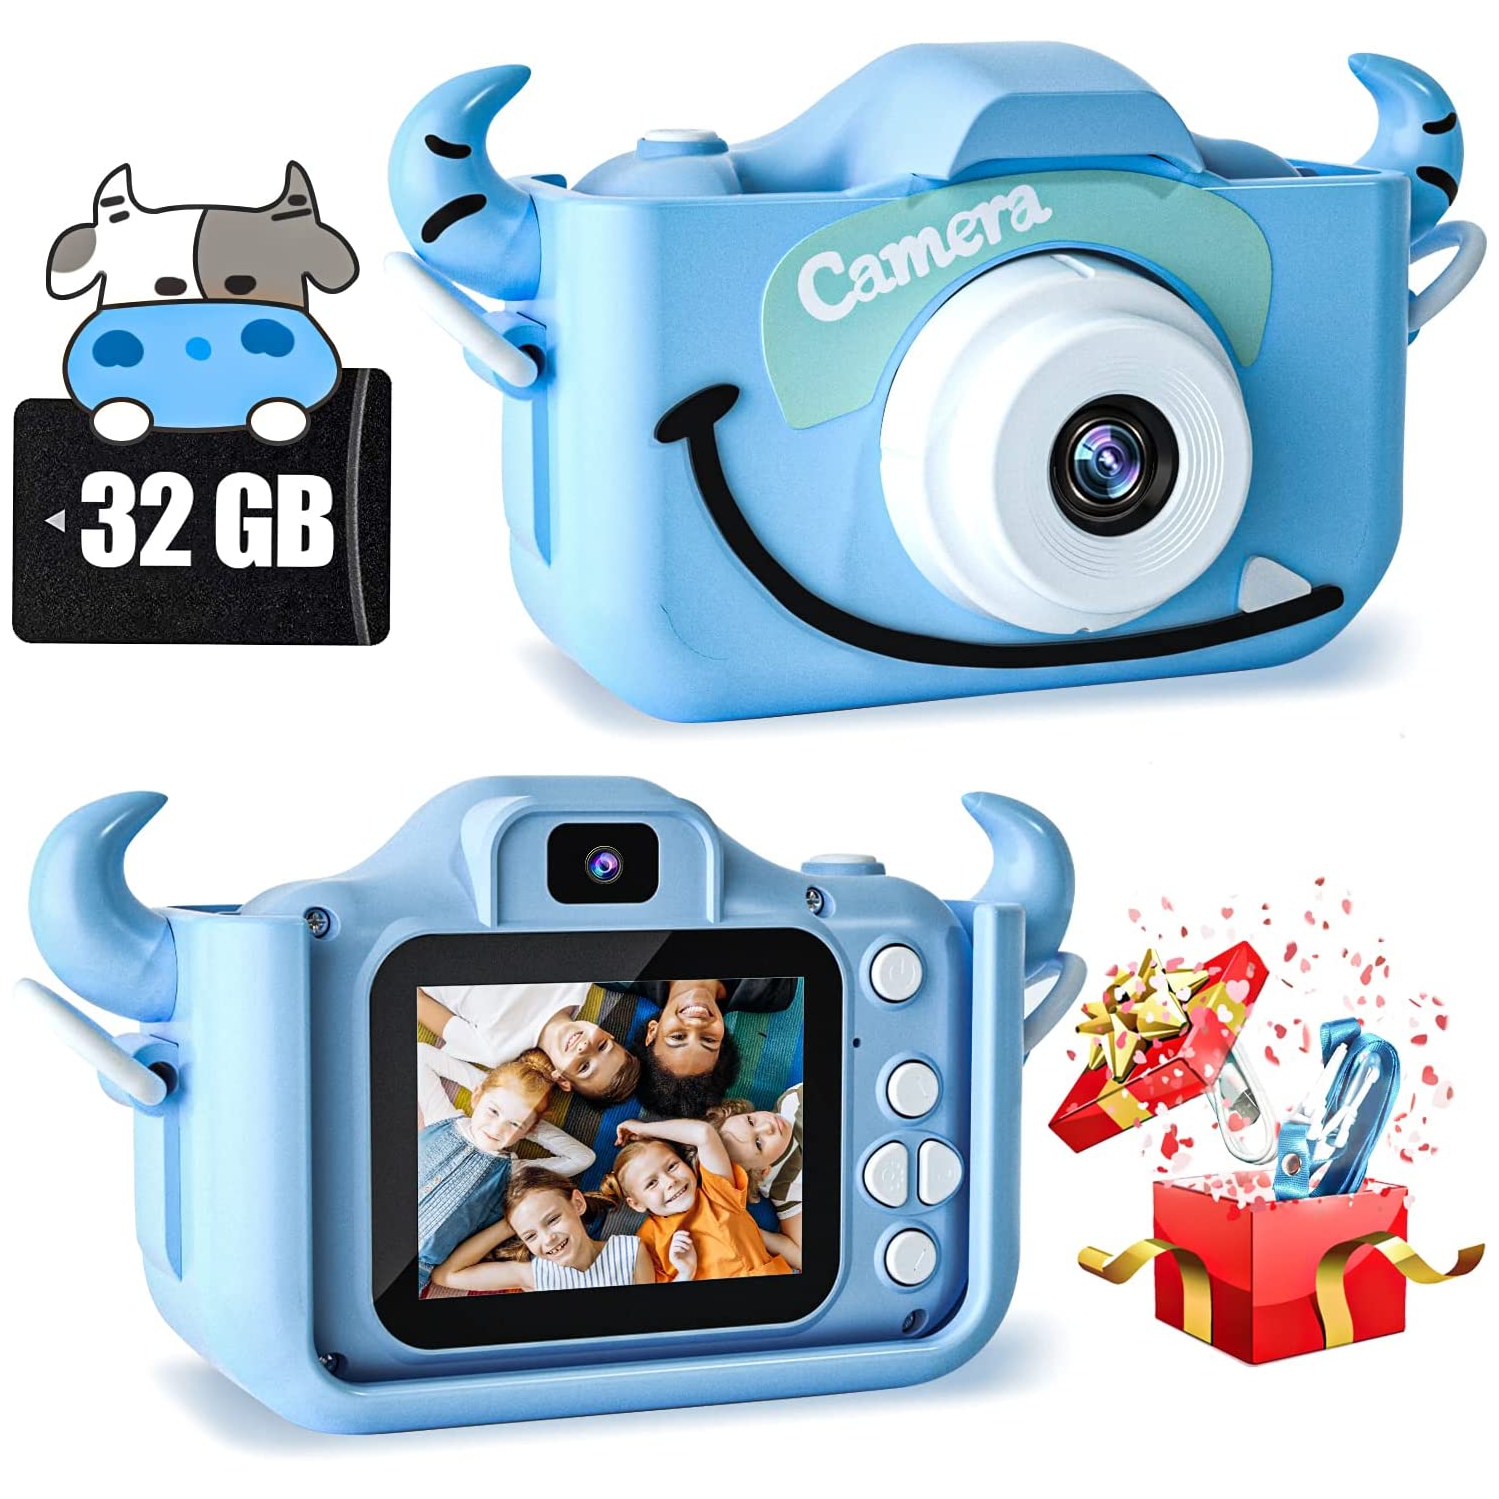 Cow Camera Toy for Kids, Digital Camera for Toddler with 2.0 Inch Display, 100° angle lens, 3 puzzle games & 28 frames, 1080p HD Video Camera with 32GB SD Card. (Blue)